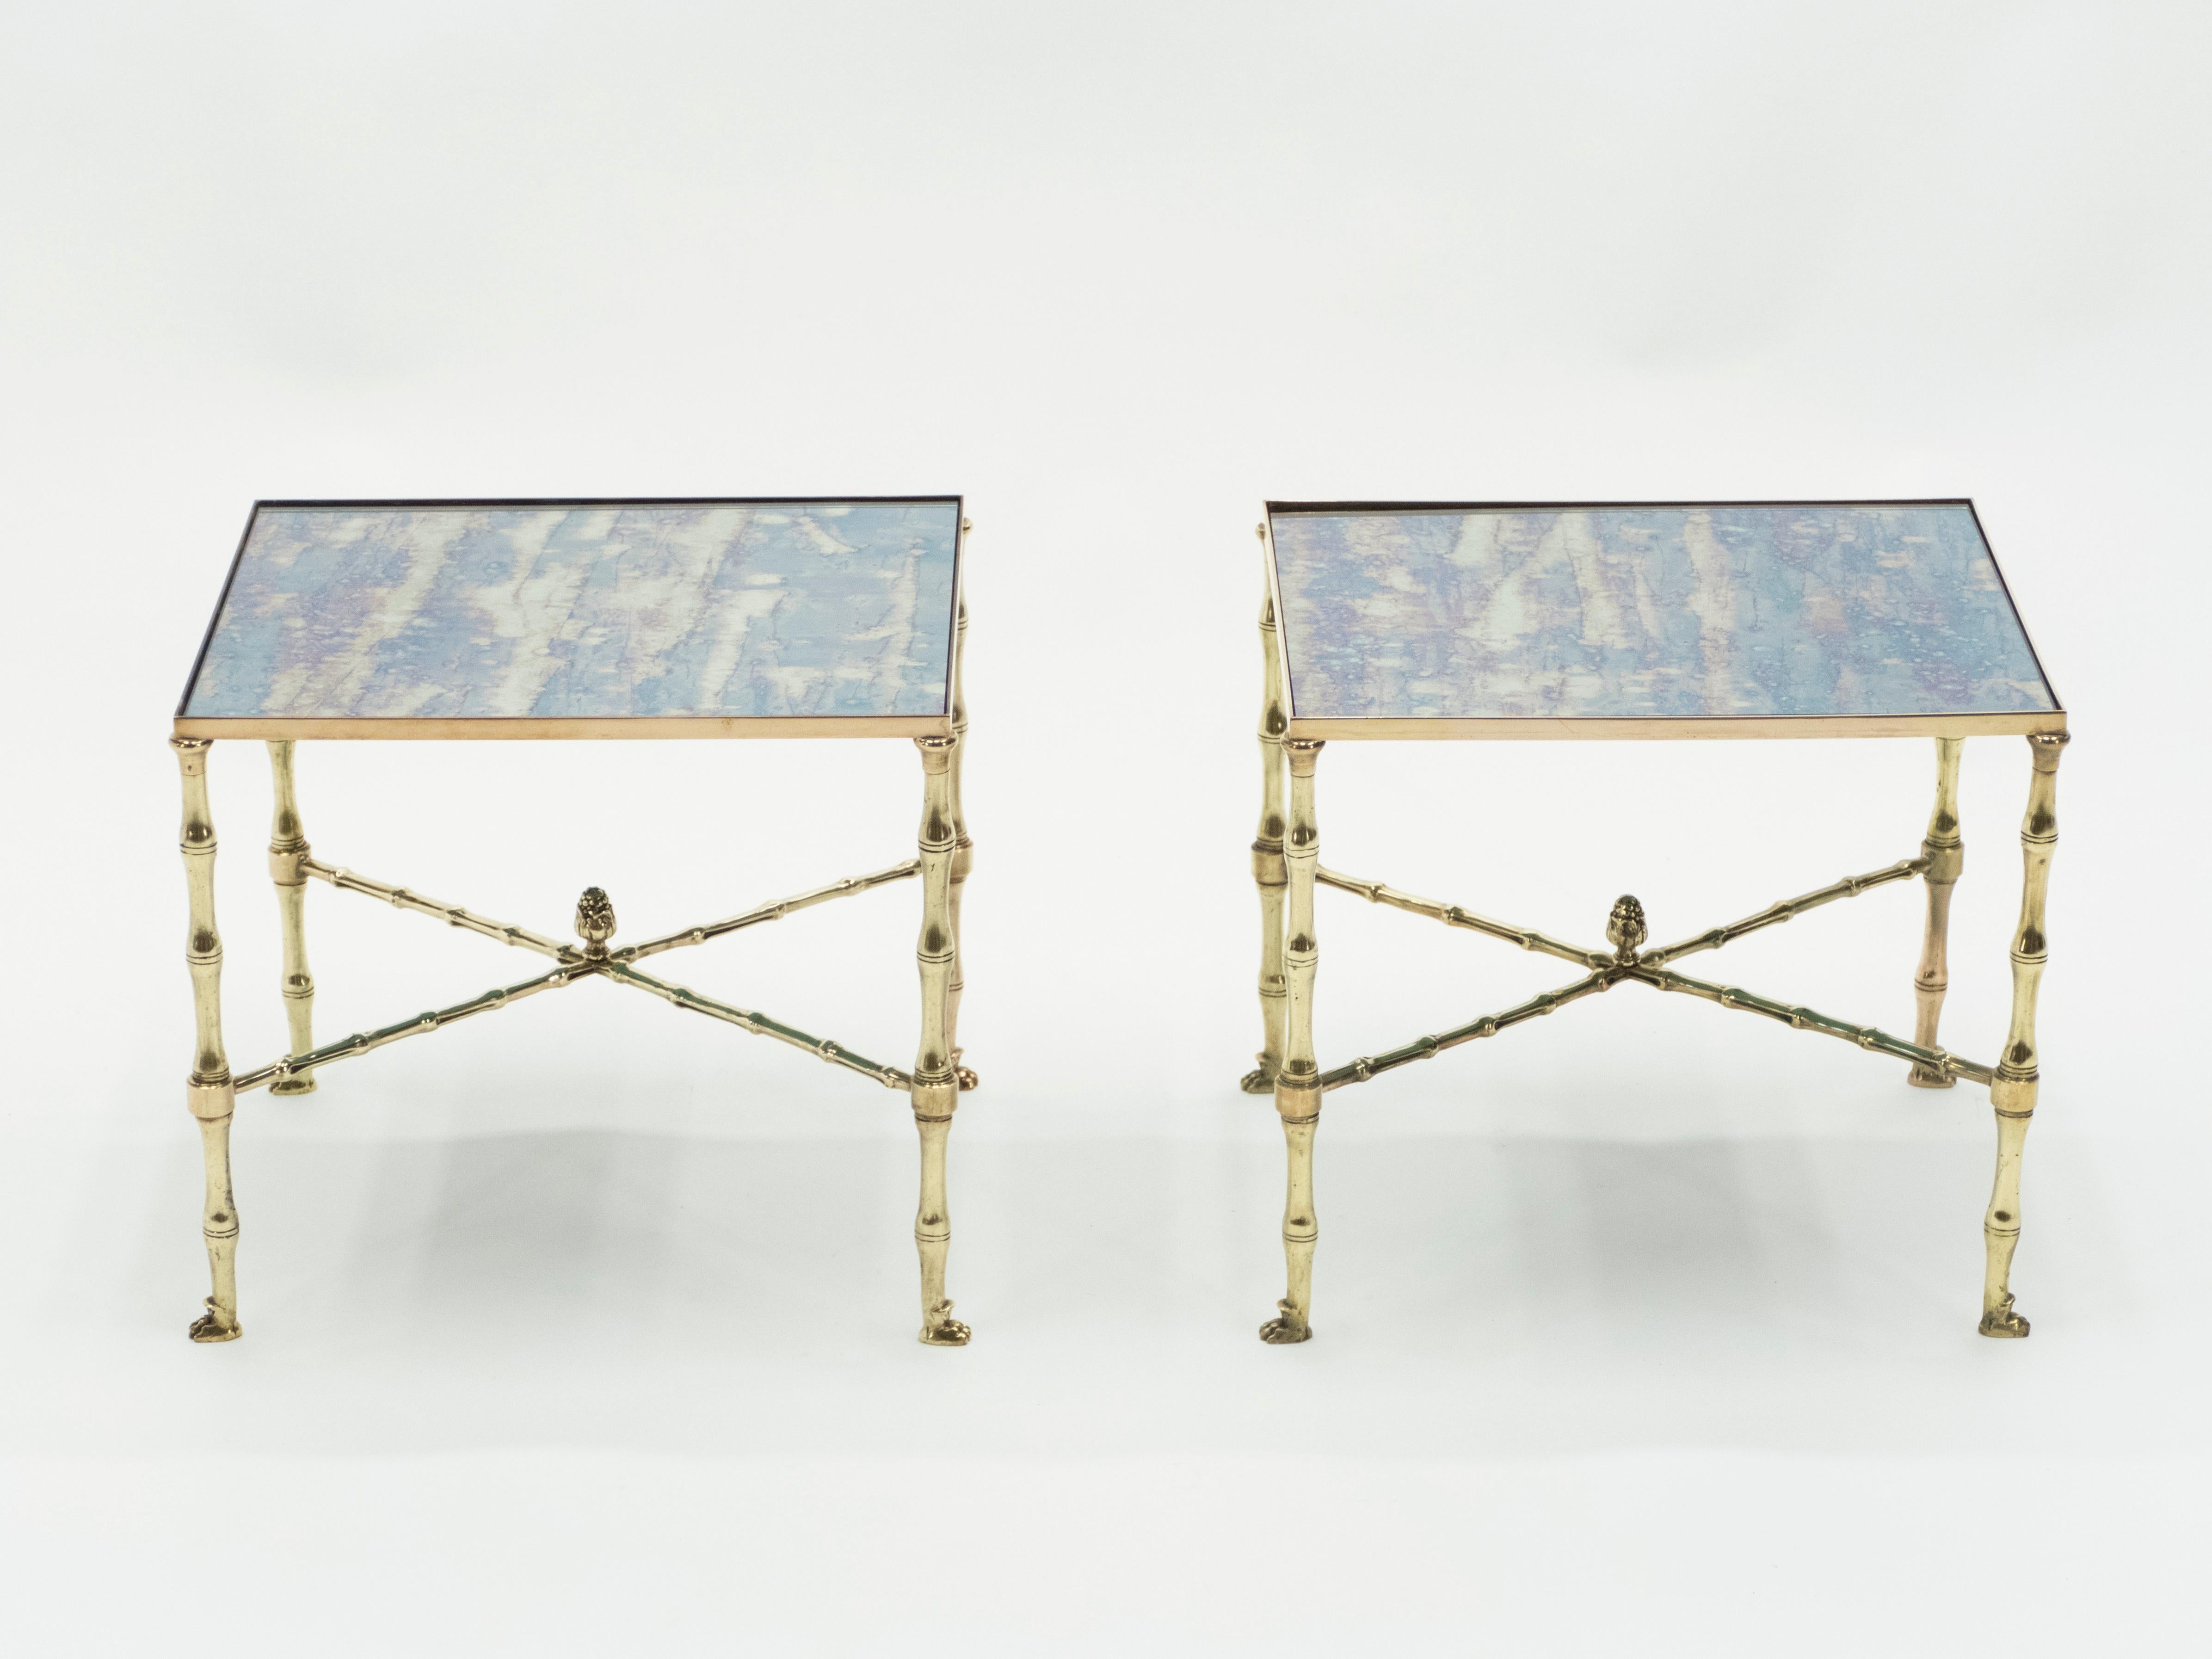 This pair of end tables by French design house Maison Jansen was created with solid brass and typical French neoclassical brass bamboo, pine cone, lion paw and old patina mirror, circa 1960. The old patina mirrored top is smooth, while the brass